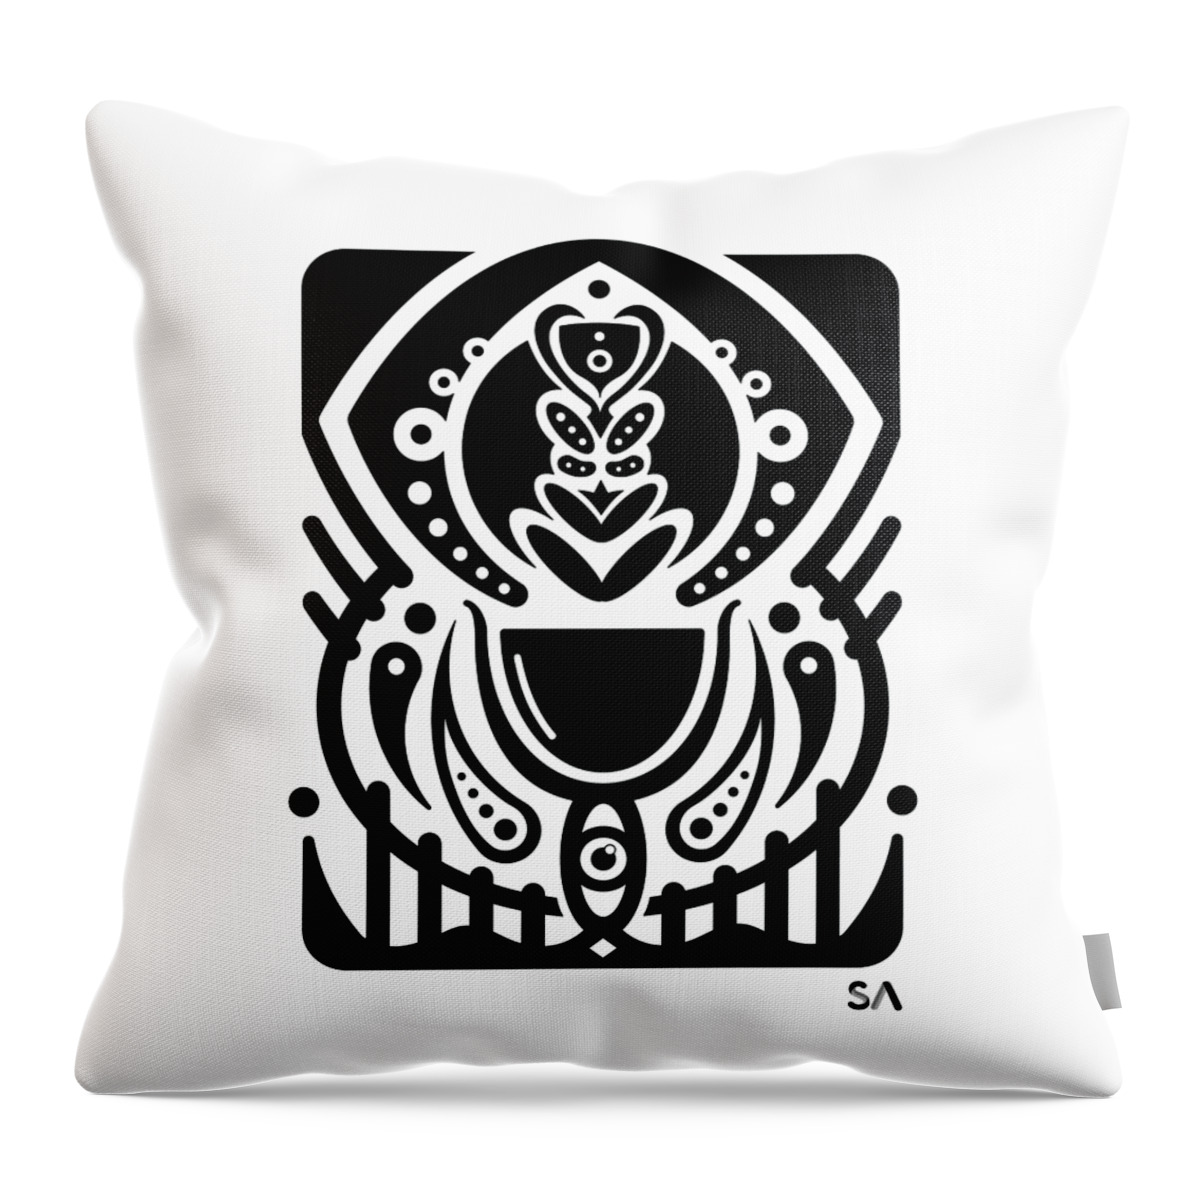 Black And White Throw Pillow featuring the digital art Wine by Silvio Ary Cavalcante